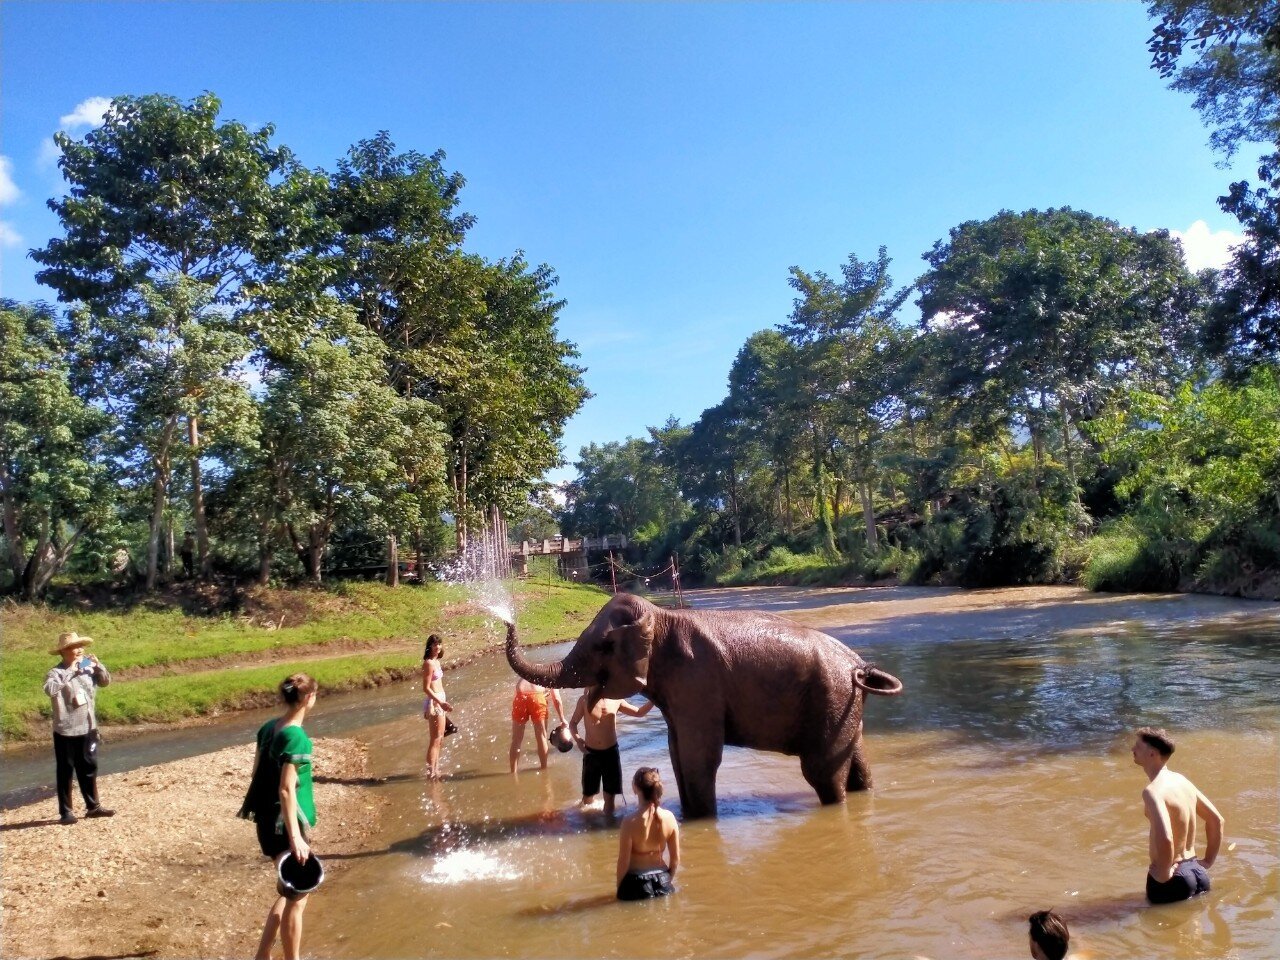 A group of people enjoying the company of an elephant in a river.